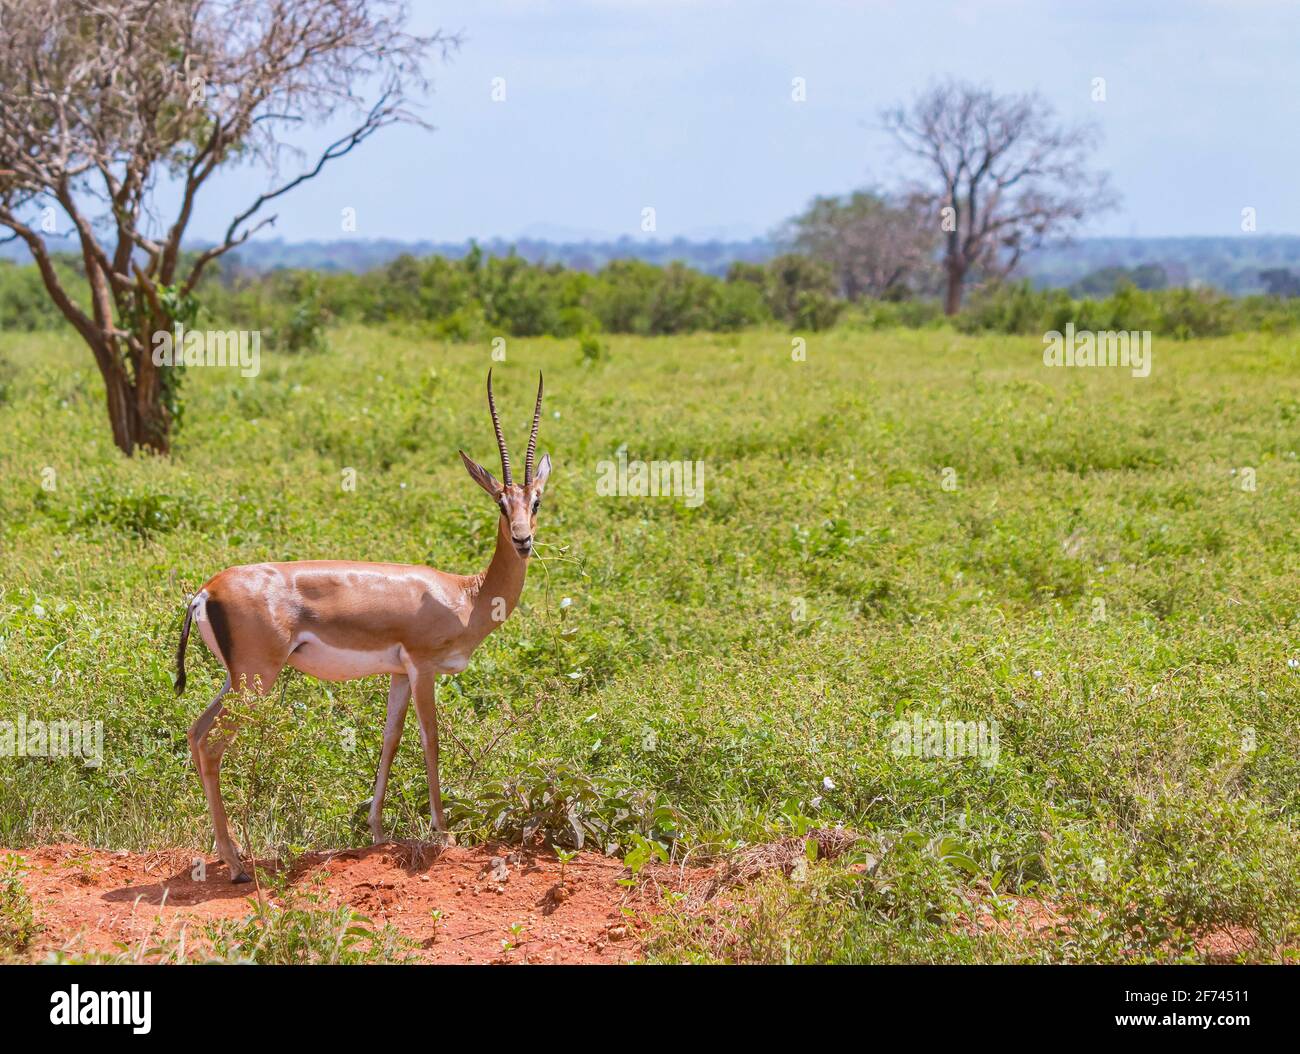 Antelope with big horns stands in the grass and chews in Tsavo East, Kenya. It is a wildlife photo from Africa. It's a beautiful sunny day. Stock Photo